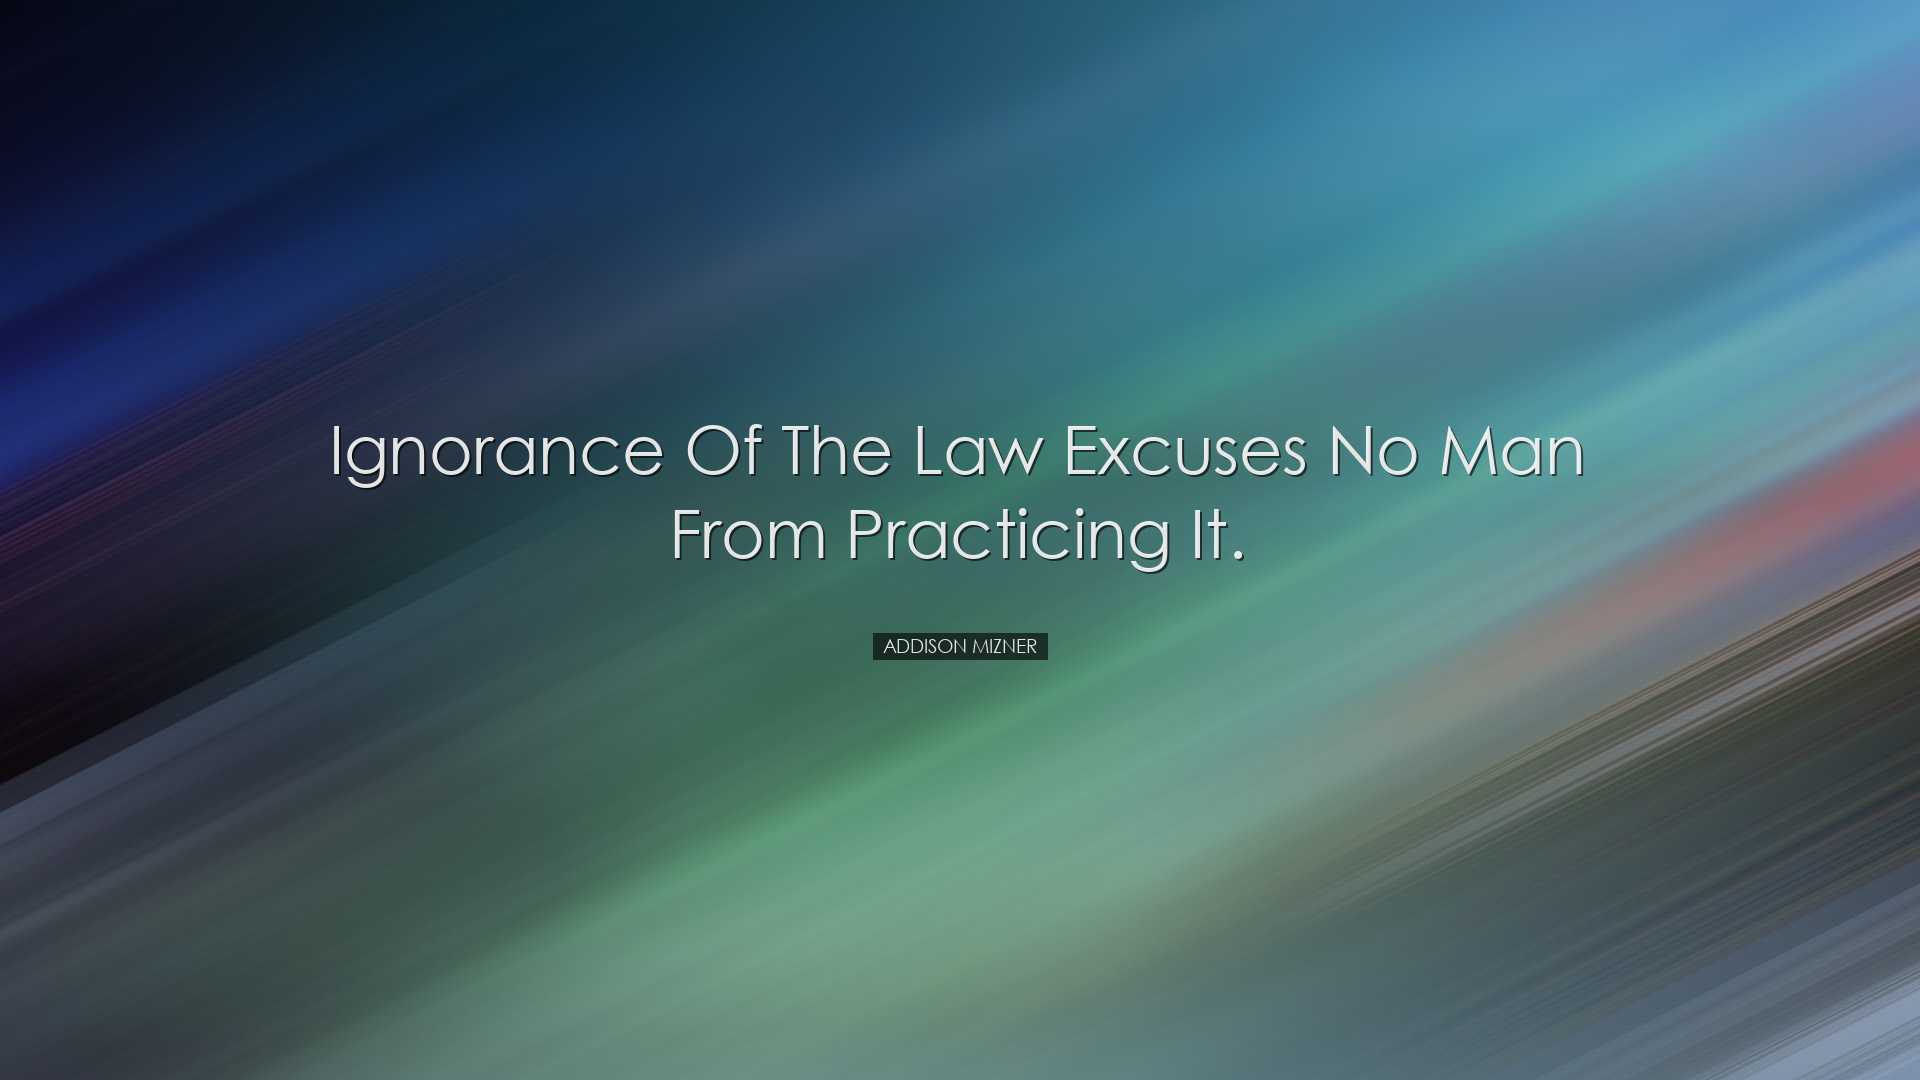 Ignorance of the law excuses no man from practicing it. - Addison